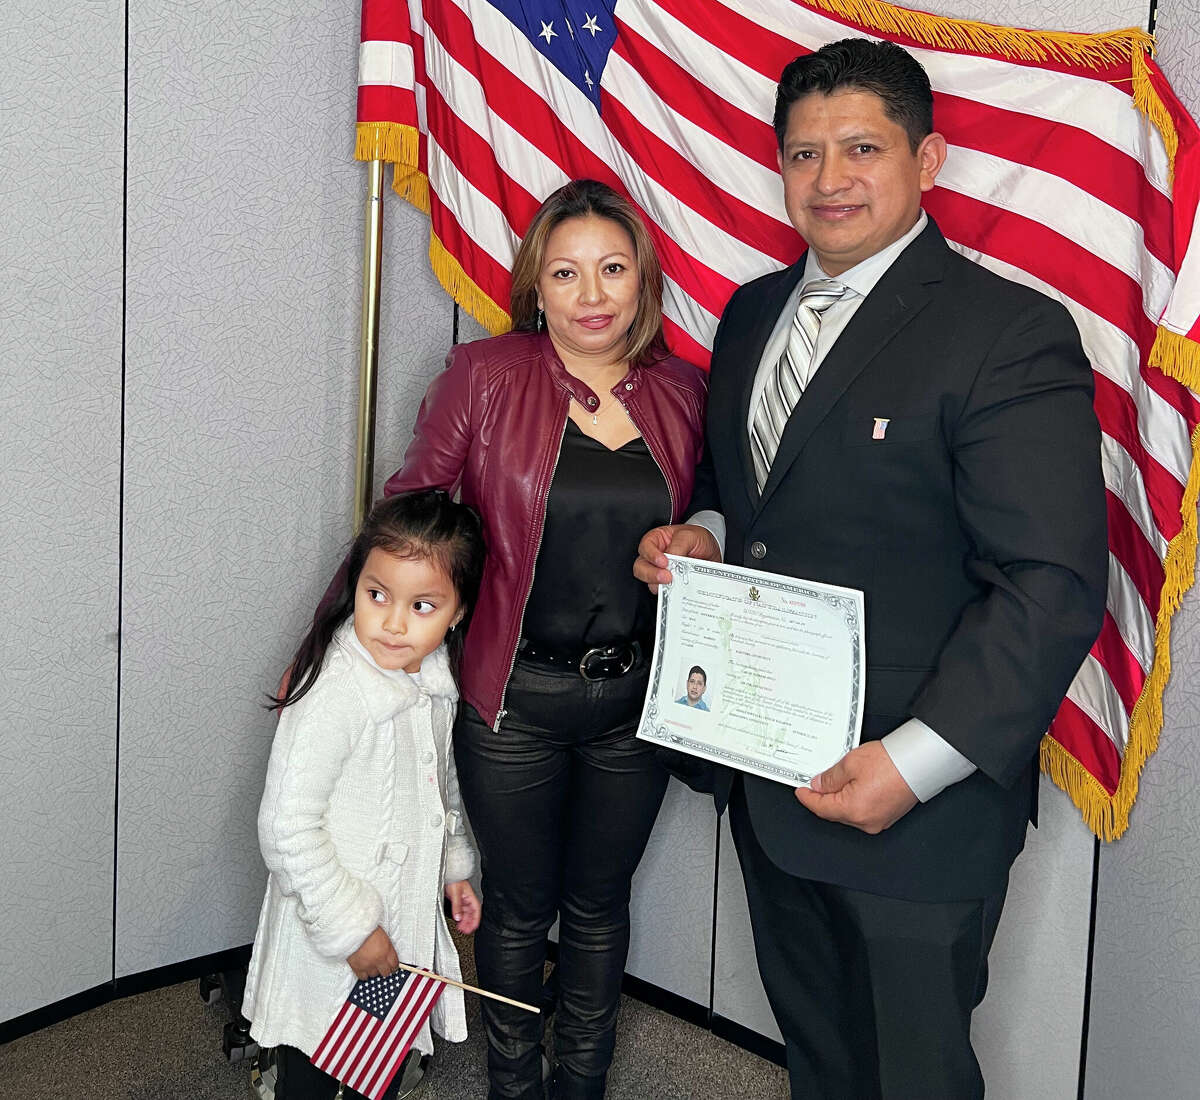 Carlos Pucci of Greenwich, right, stands with his wife Silvia, center, and daughter Ashley, left. Pucci, who emigrated from Ecuador, became a U.S. citizen Friday at the Middletown Elks Club.